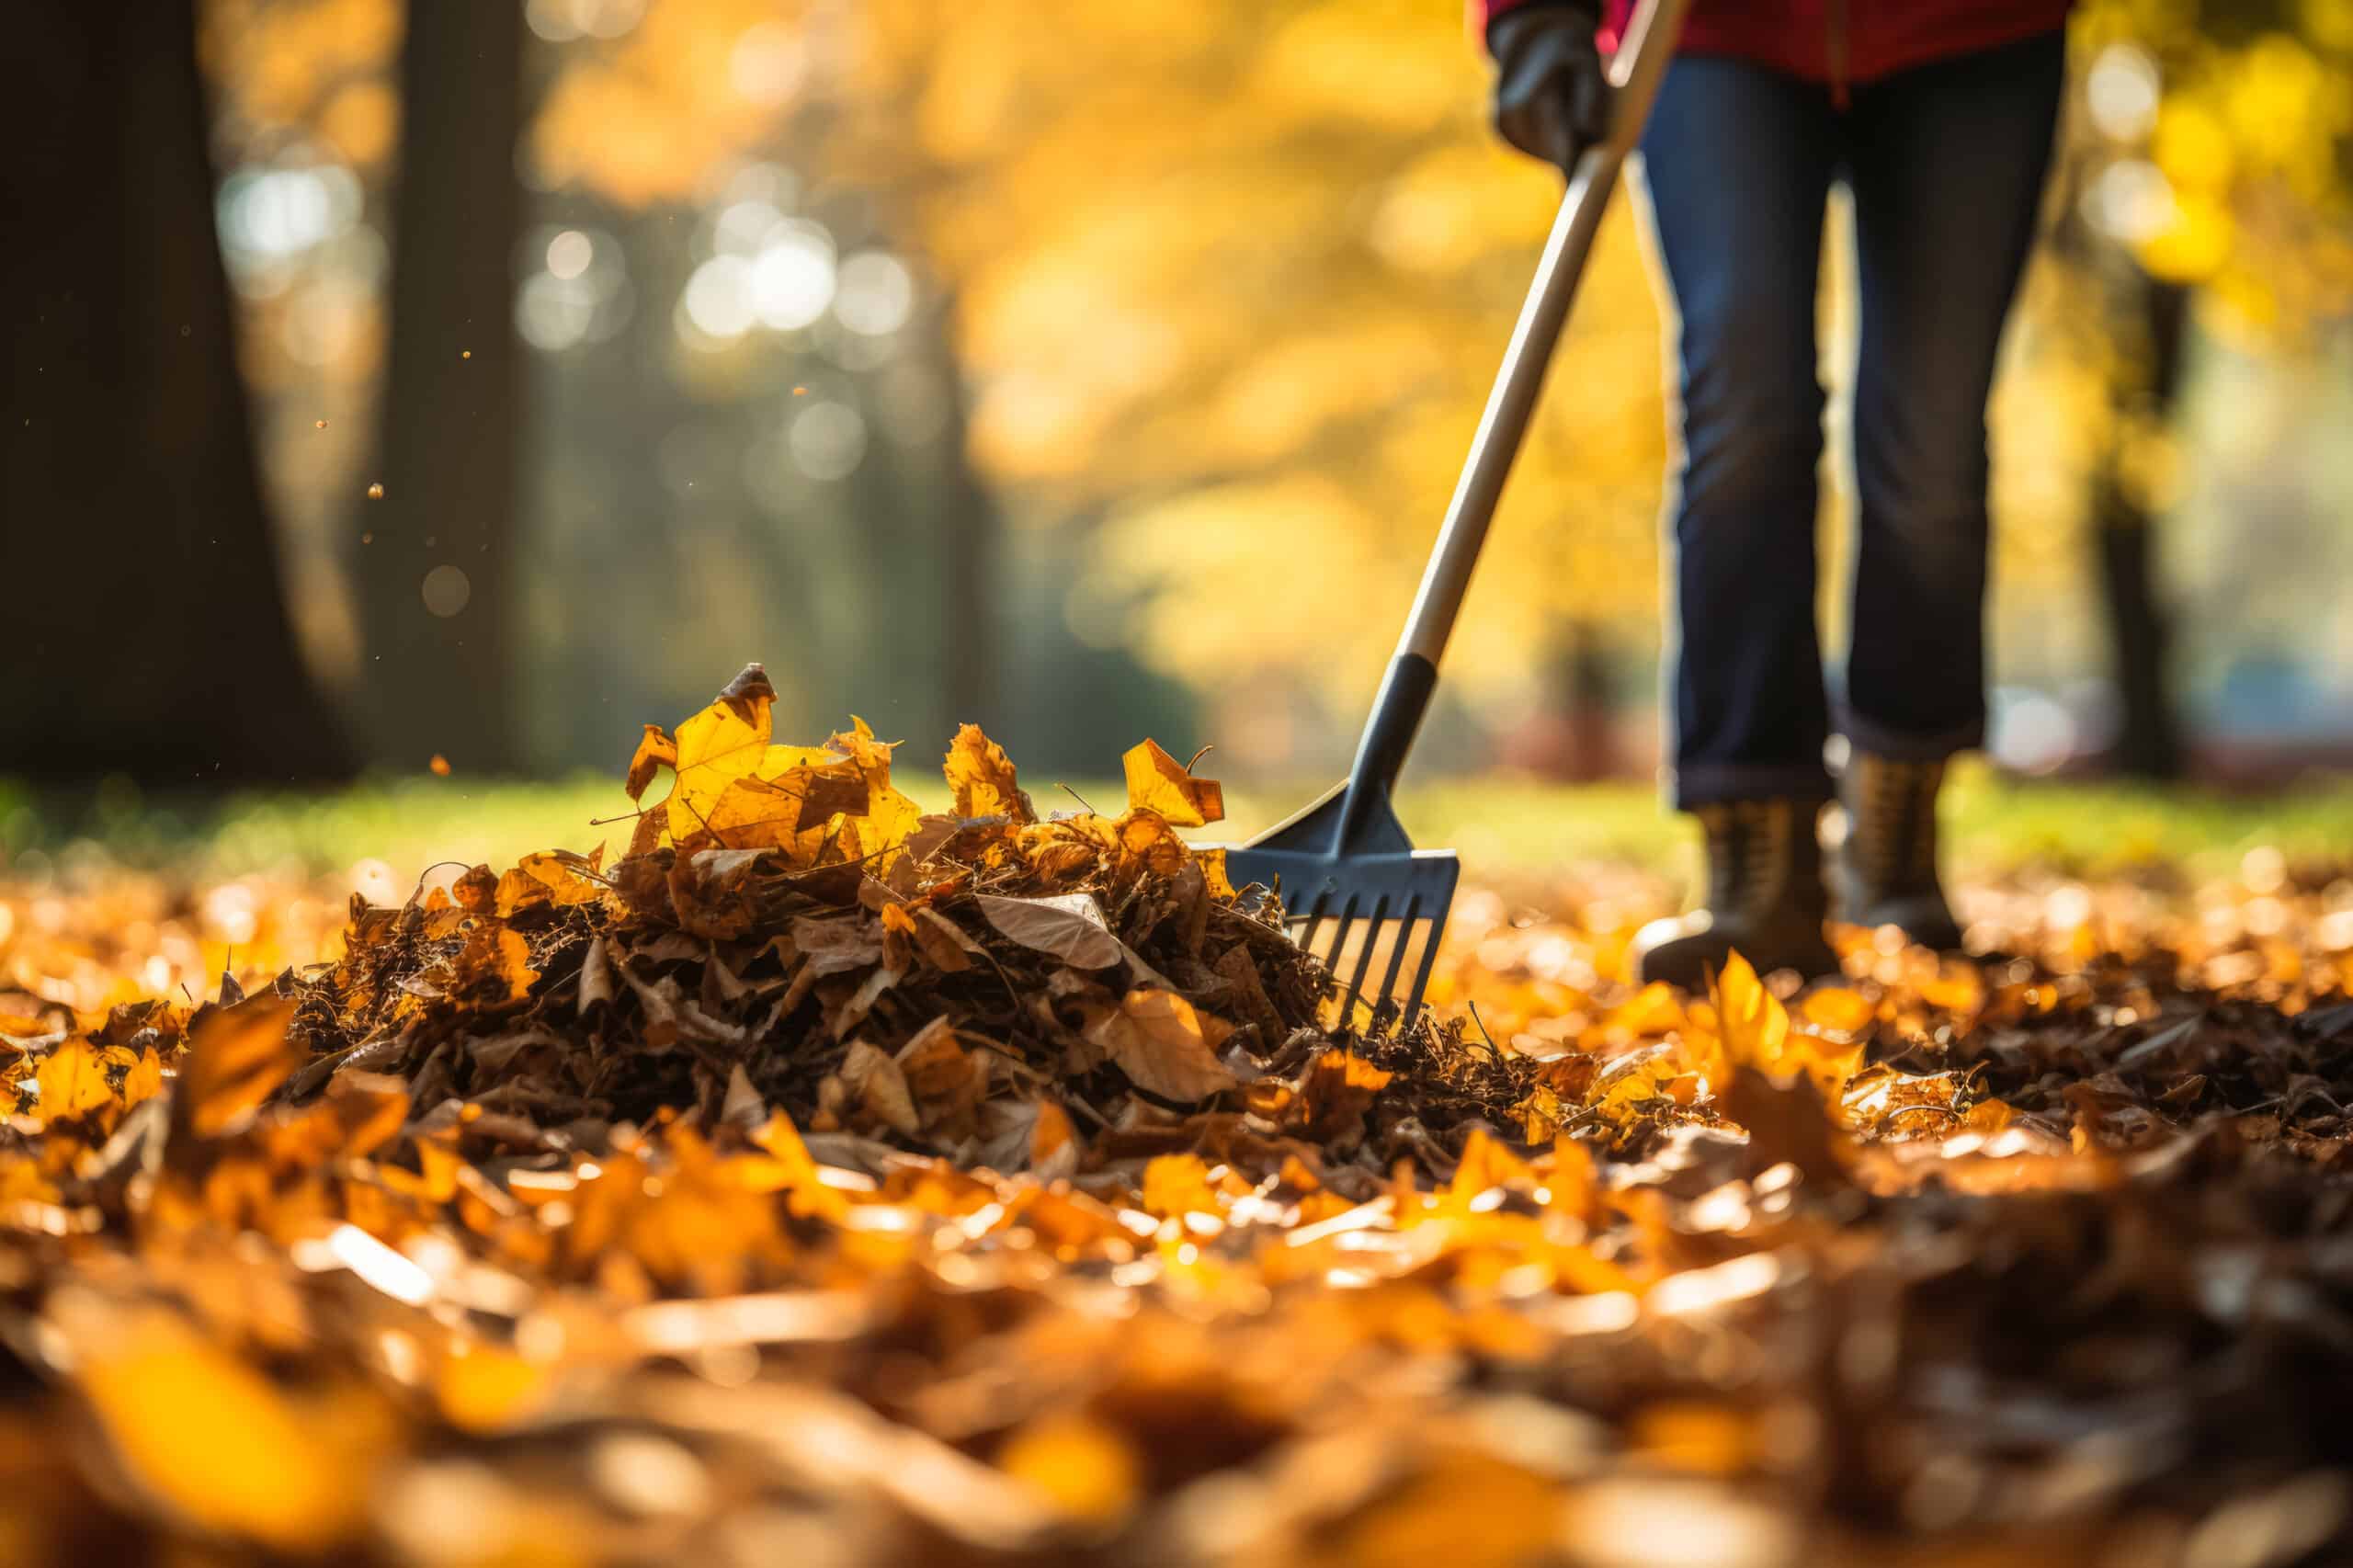 www.appr.com : Do leaf blowers negatively impact the environment?